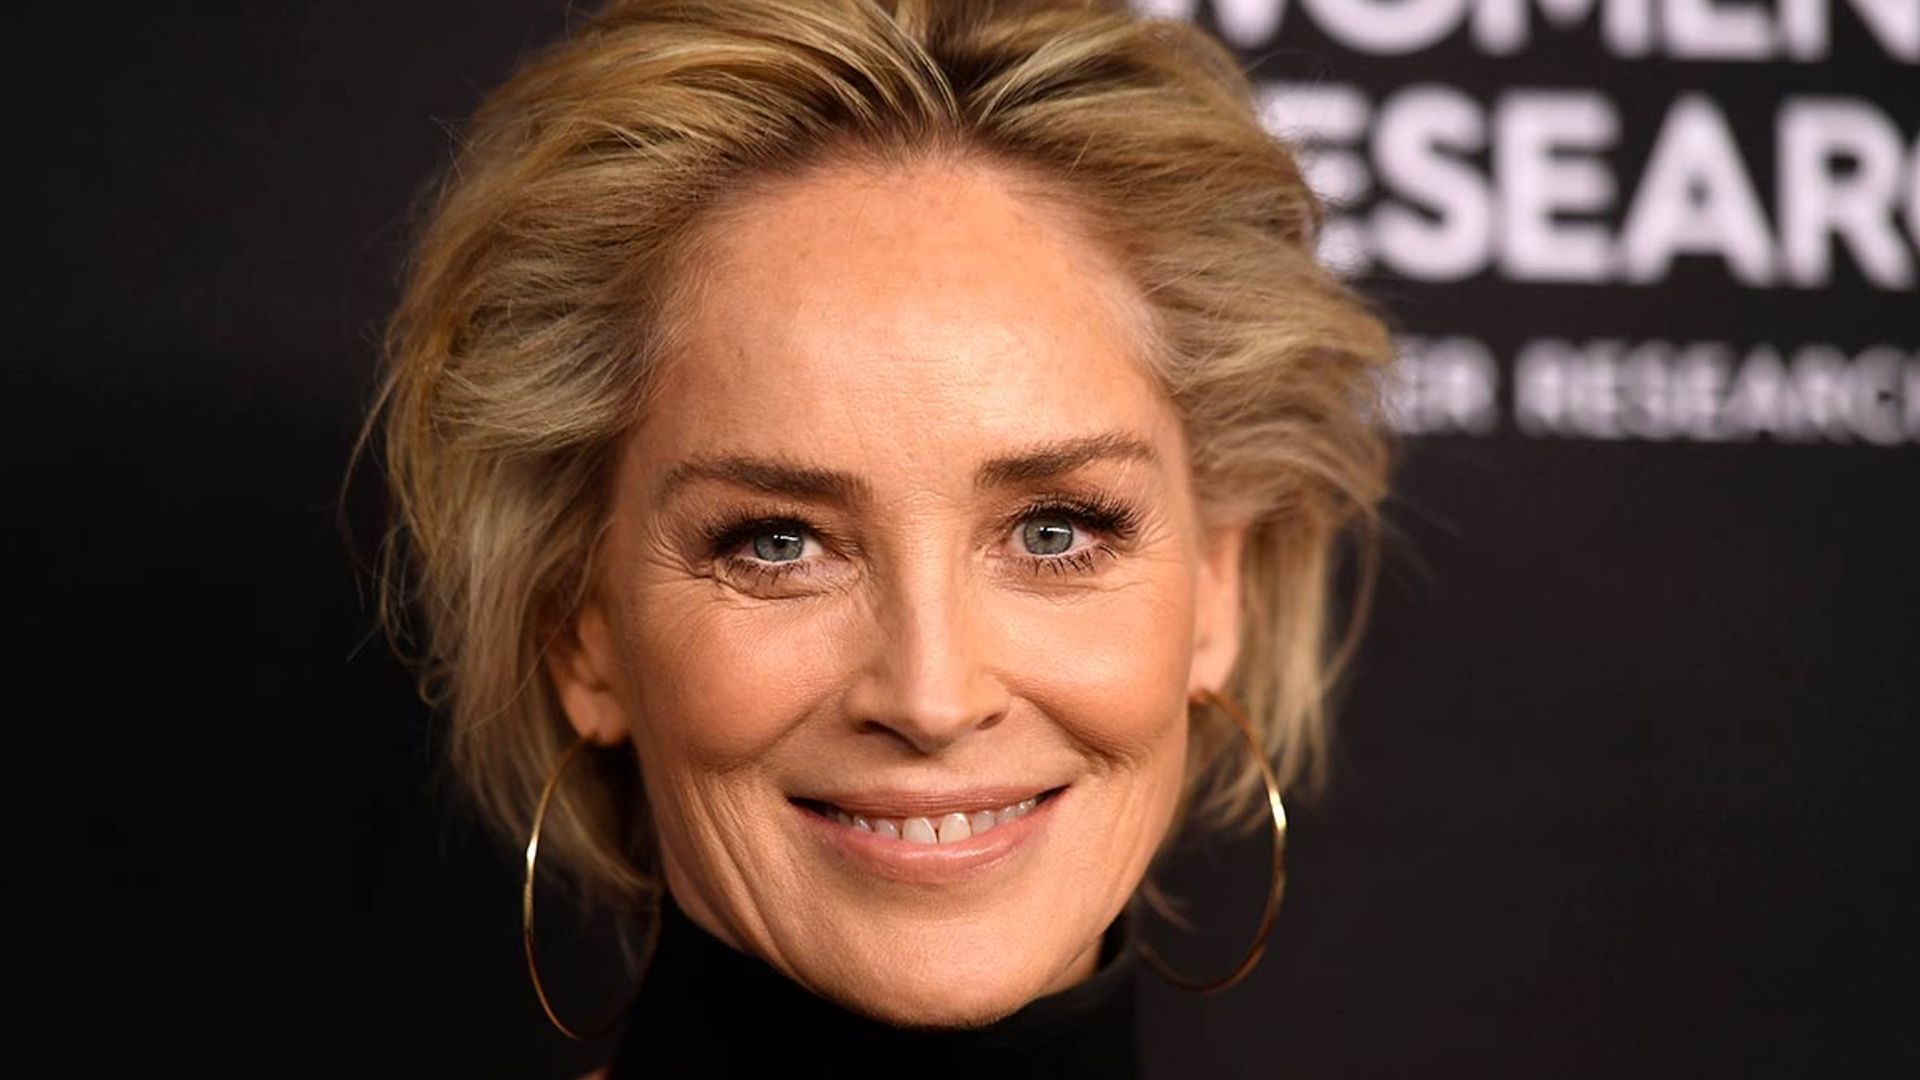 Sharon Stone breaks silence following moving tribute to late nephew River after sad death